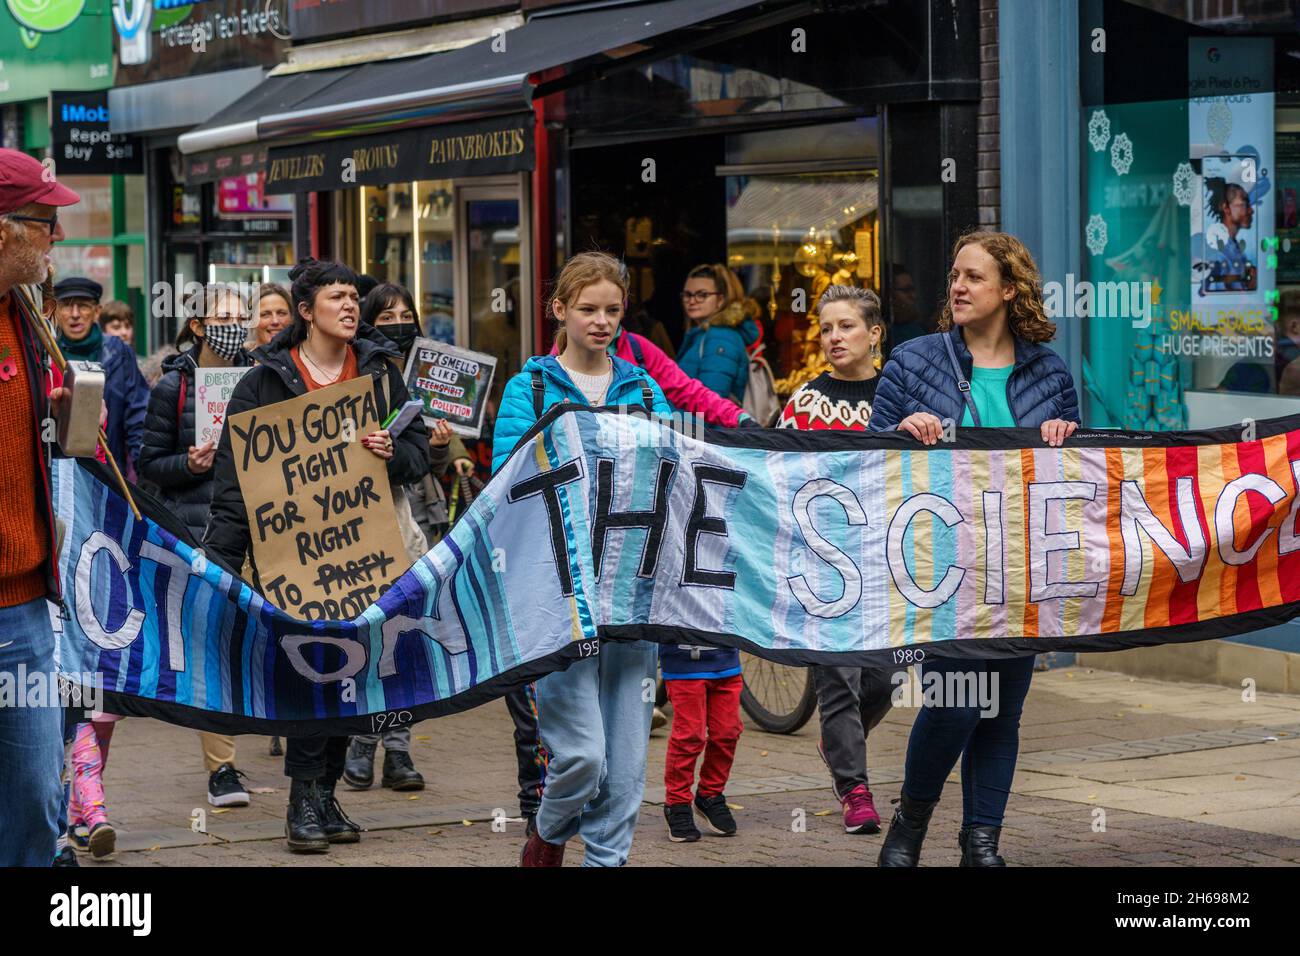 Harrogate Extinction Rebellion activists march through the town with banners and slogans to raise awareness about global warming, England, UK. Stock Photo